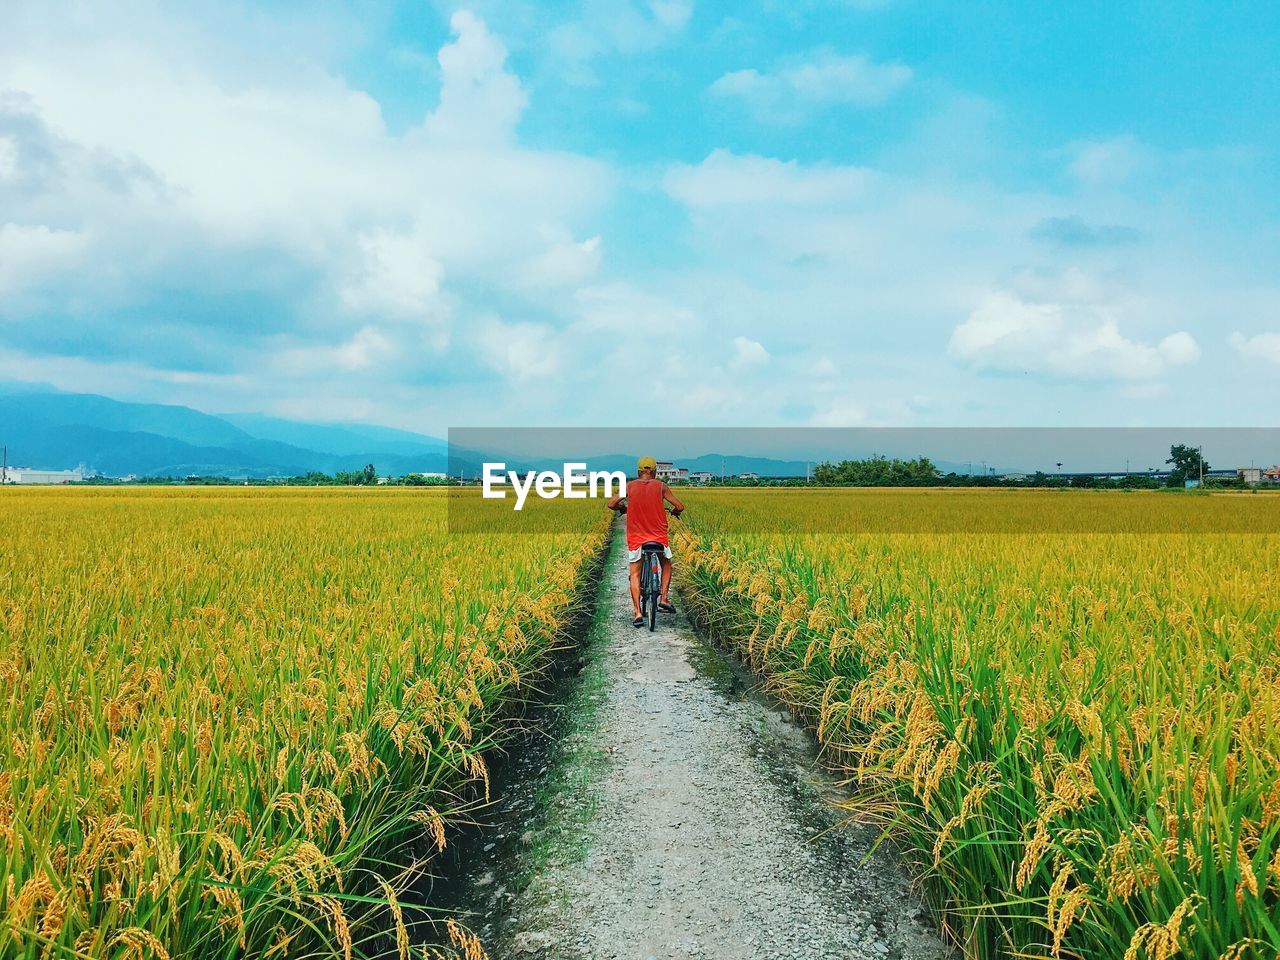 Man cycling on dirt road amidst crops growing at farm against sky